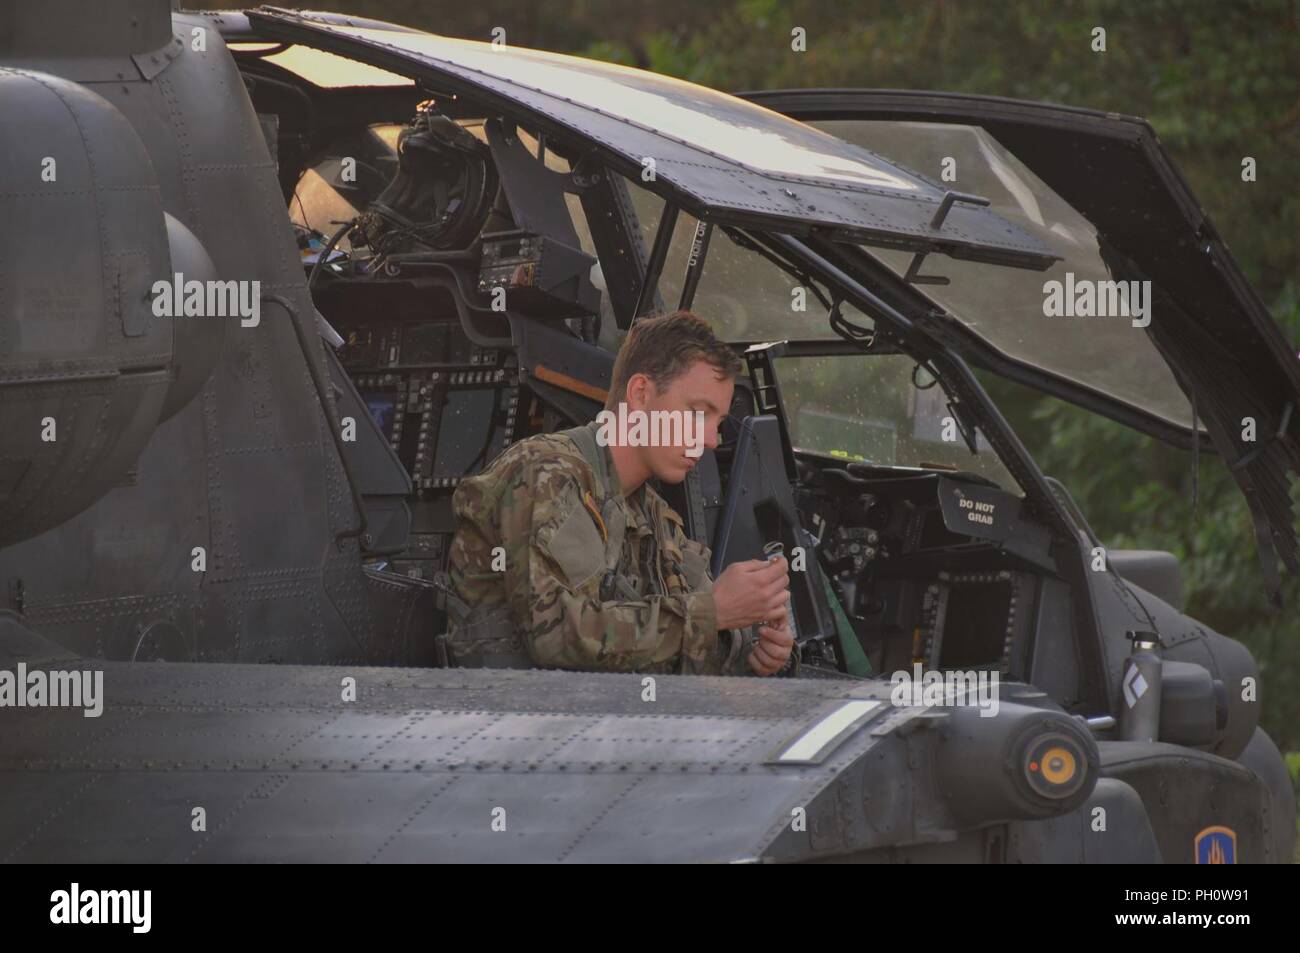 A U.S. Army Apache helicopter pilot assigned to Task Force Viper 1st Battalion, 3rd Aviation Regiment, 12th Combat Aviation Brigade makes final checks before departing Zagan Poland Training Area on June 21, 2018. Stock Photo